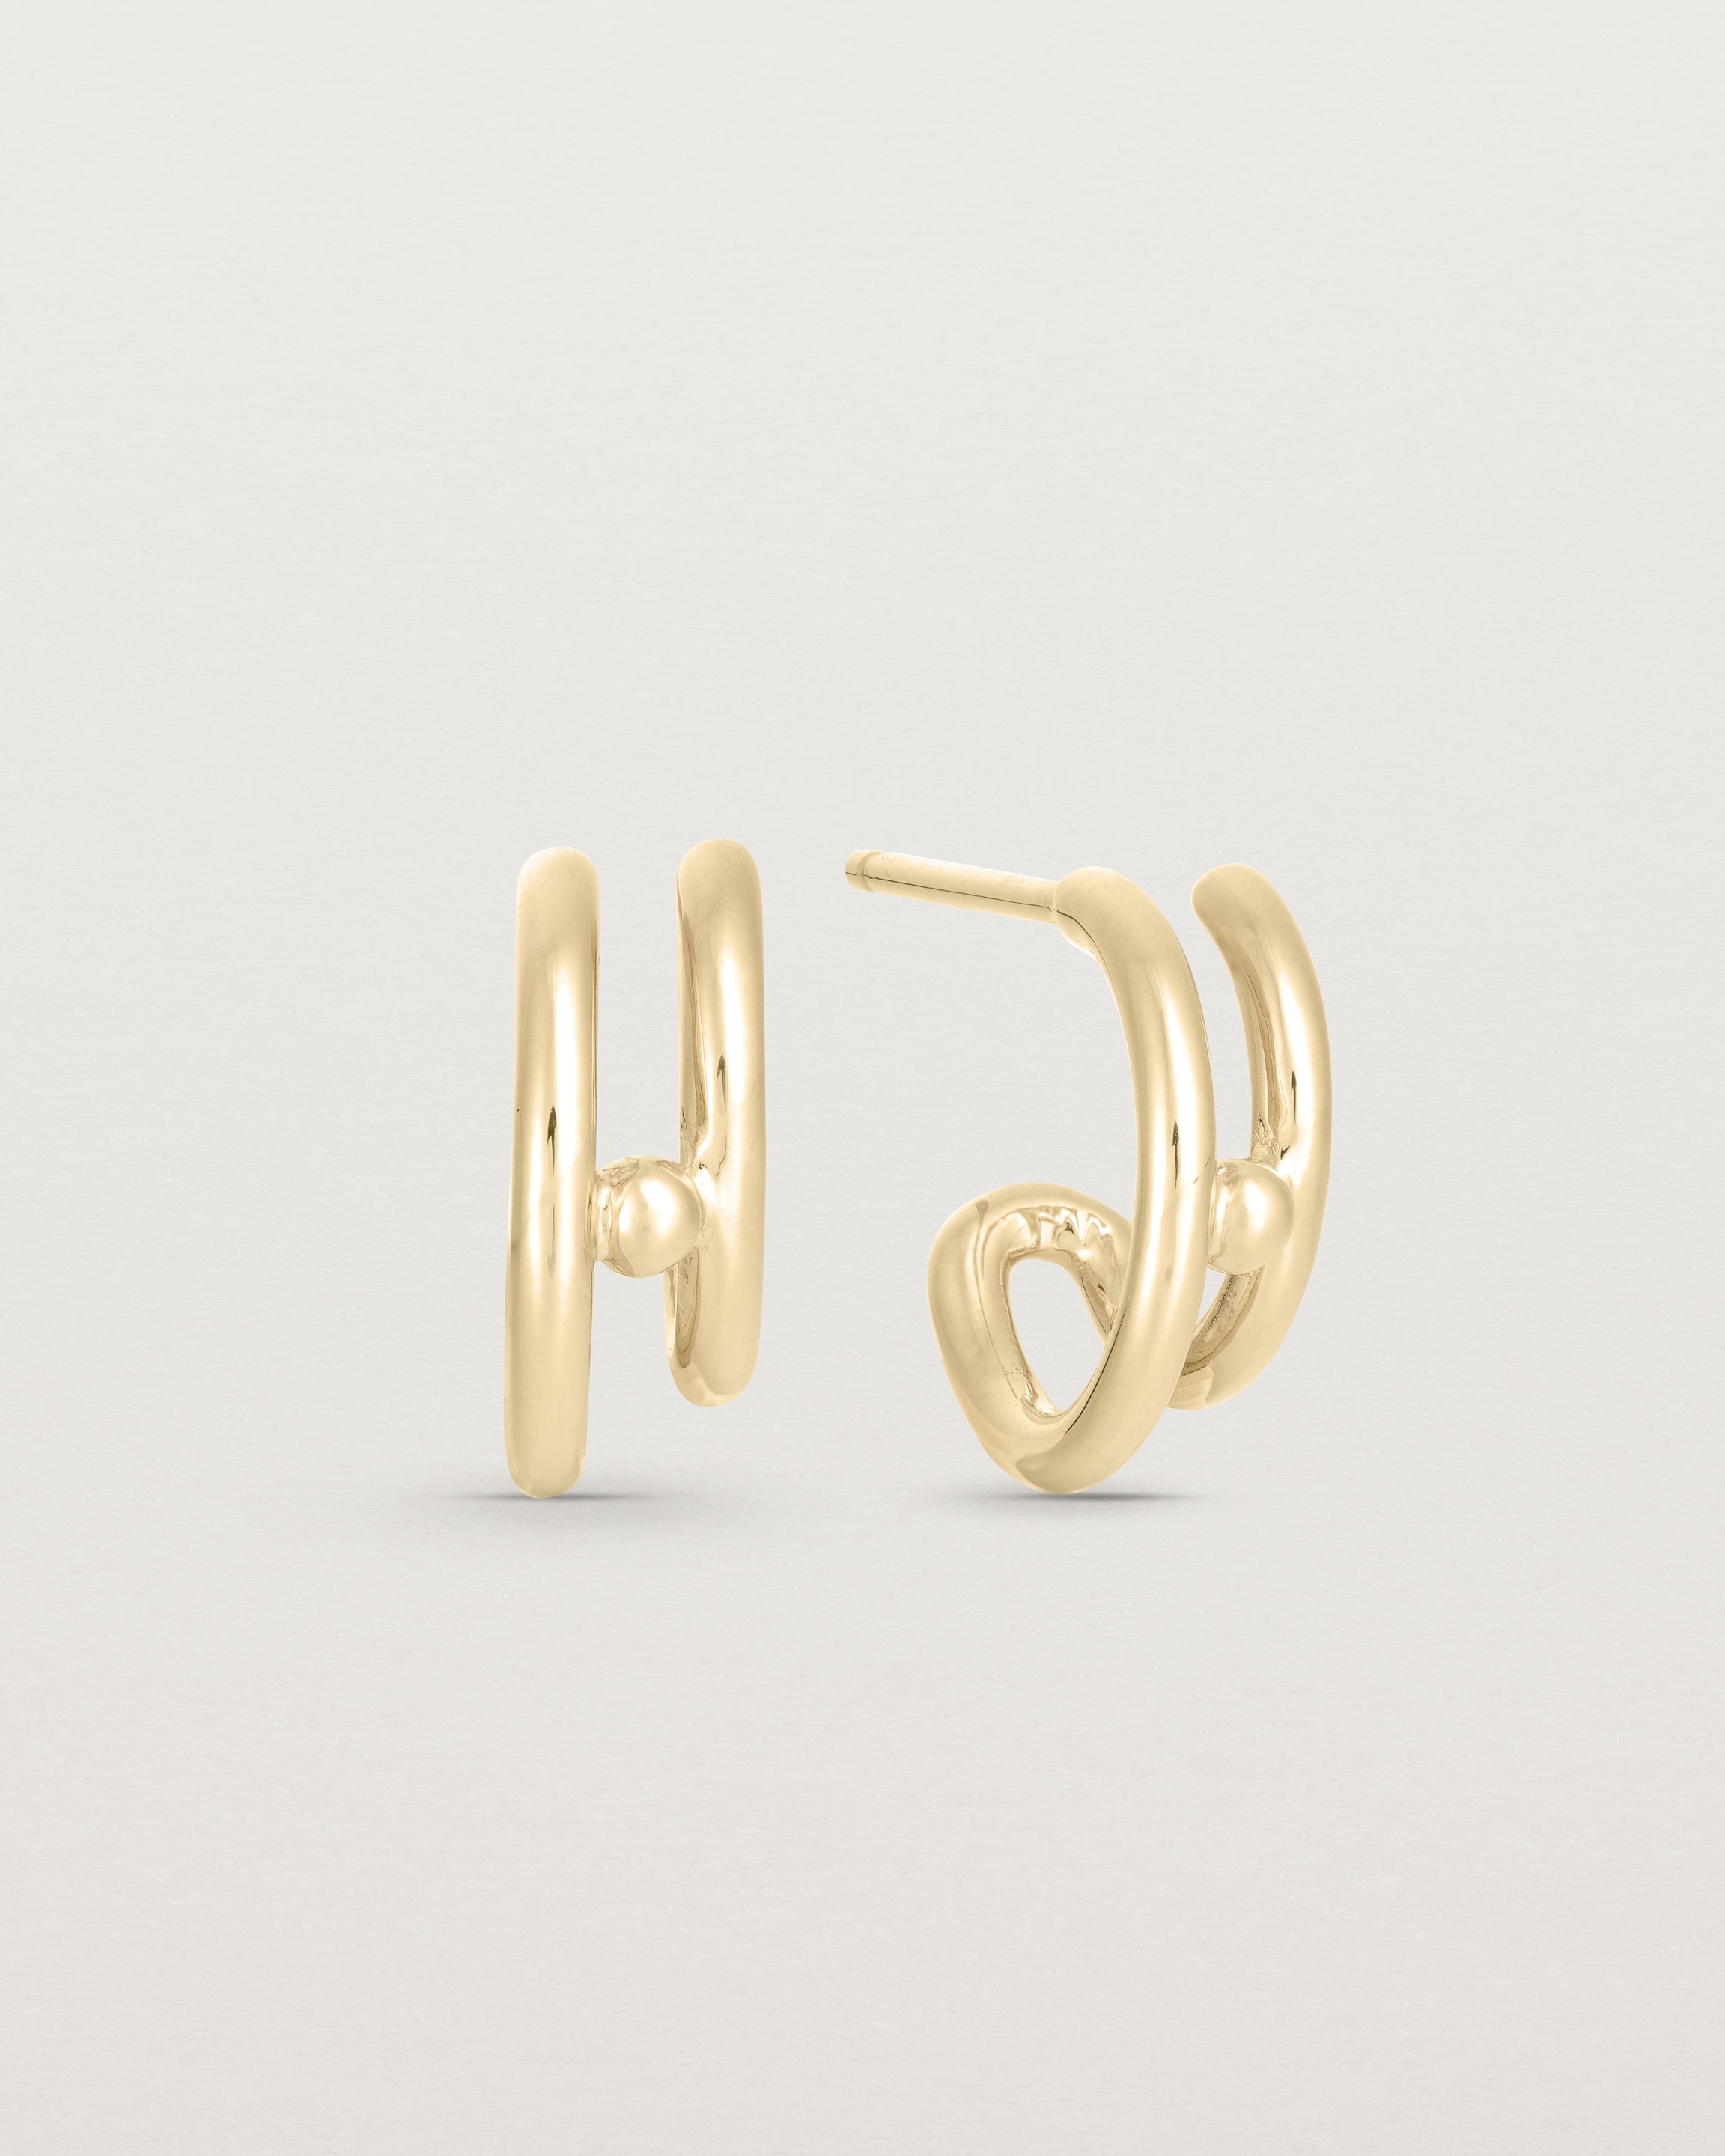 A pair of Double Reliquum Hoops in yellow gold.